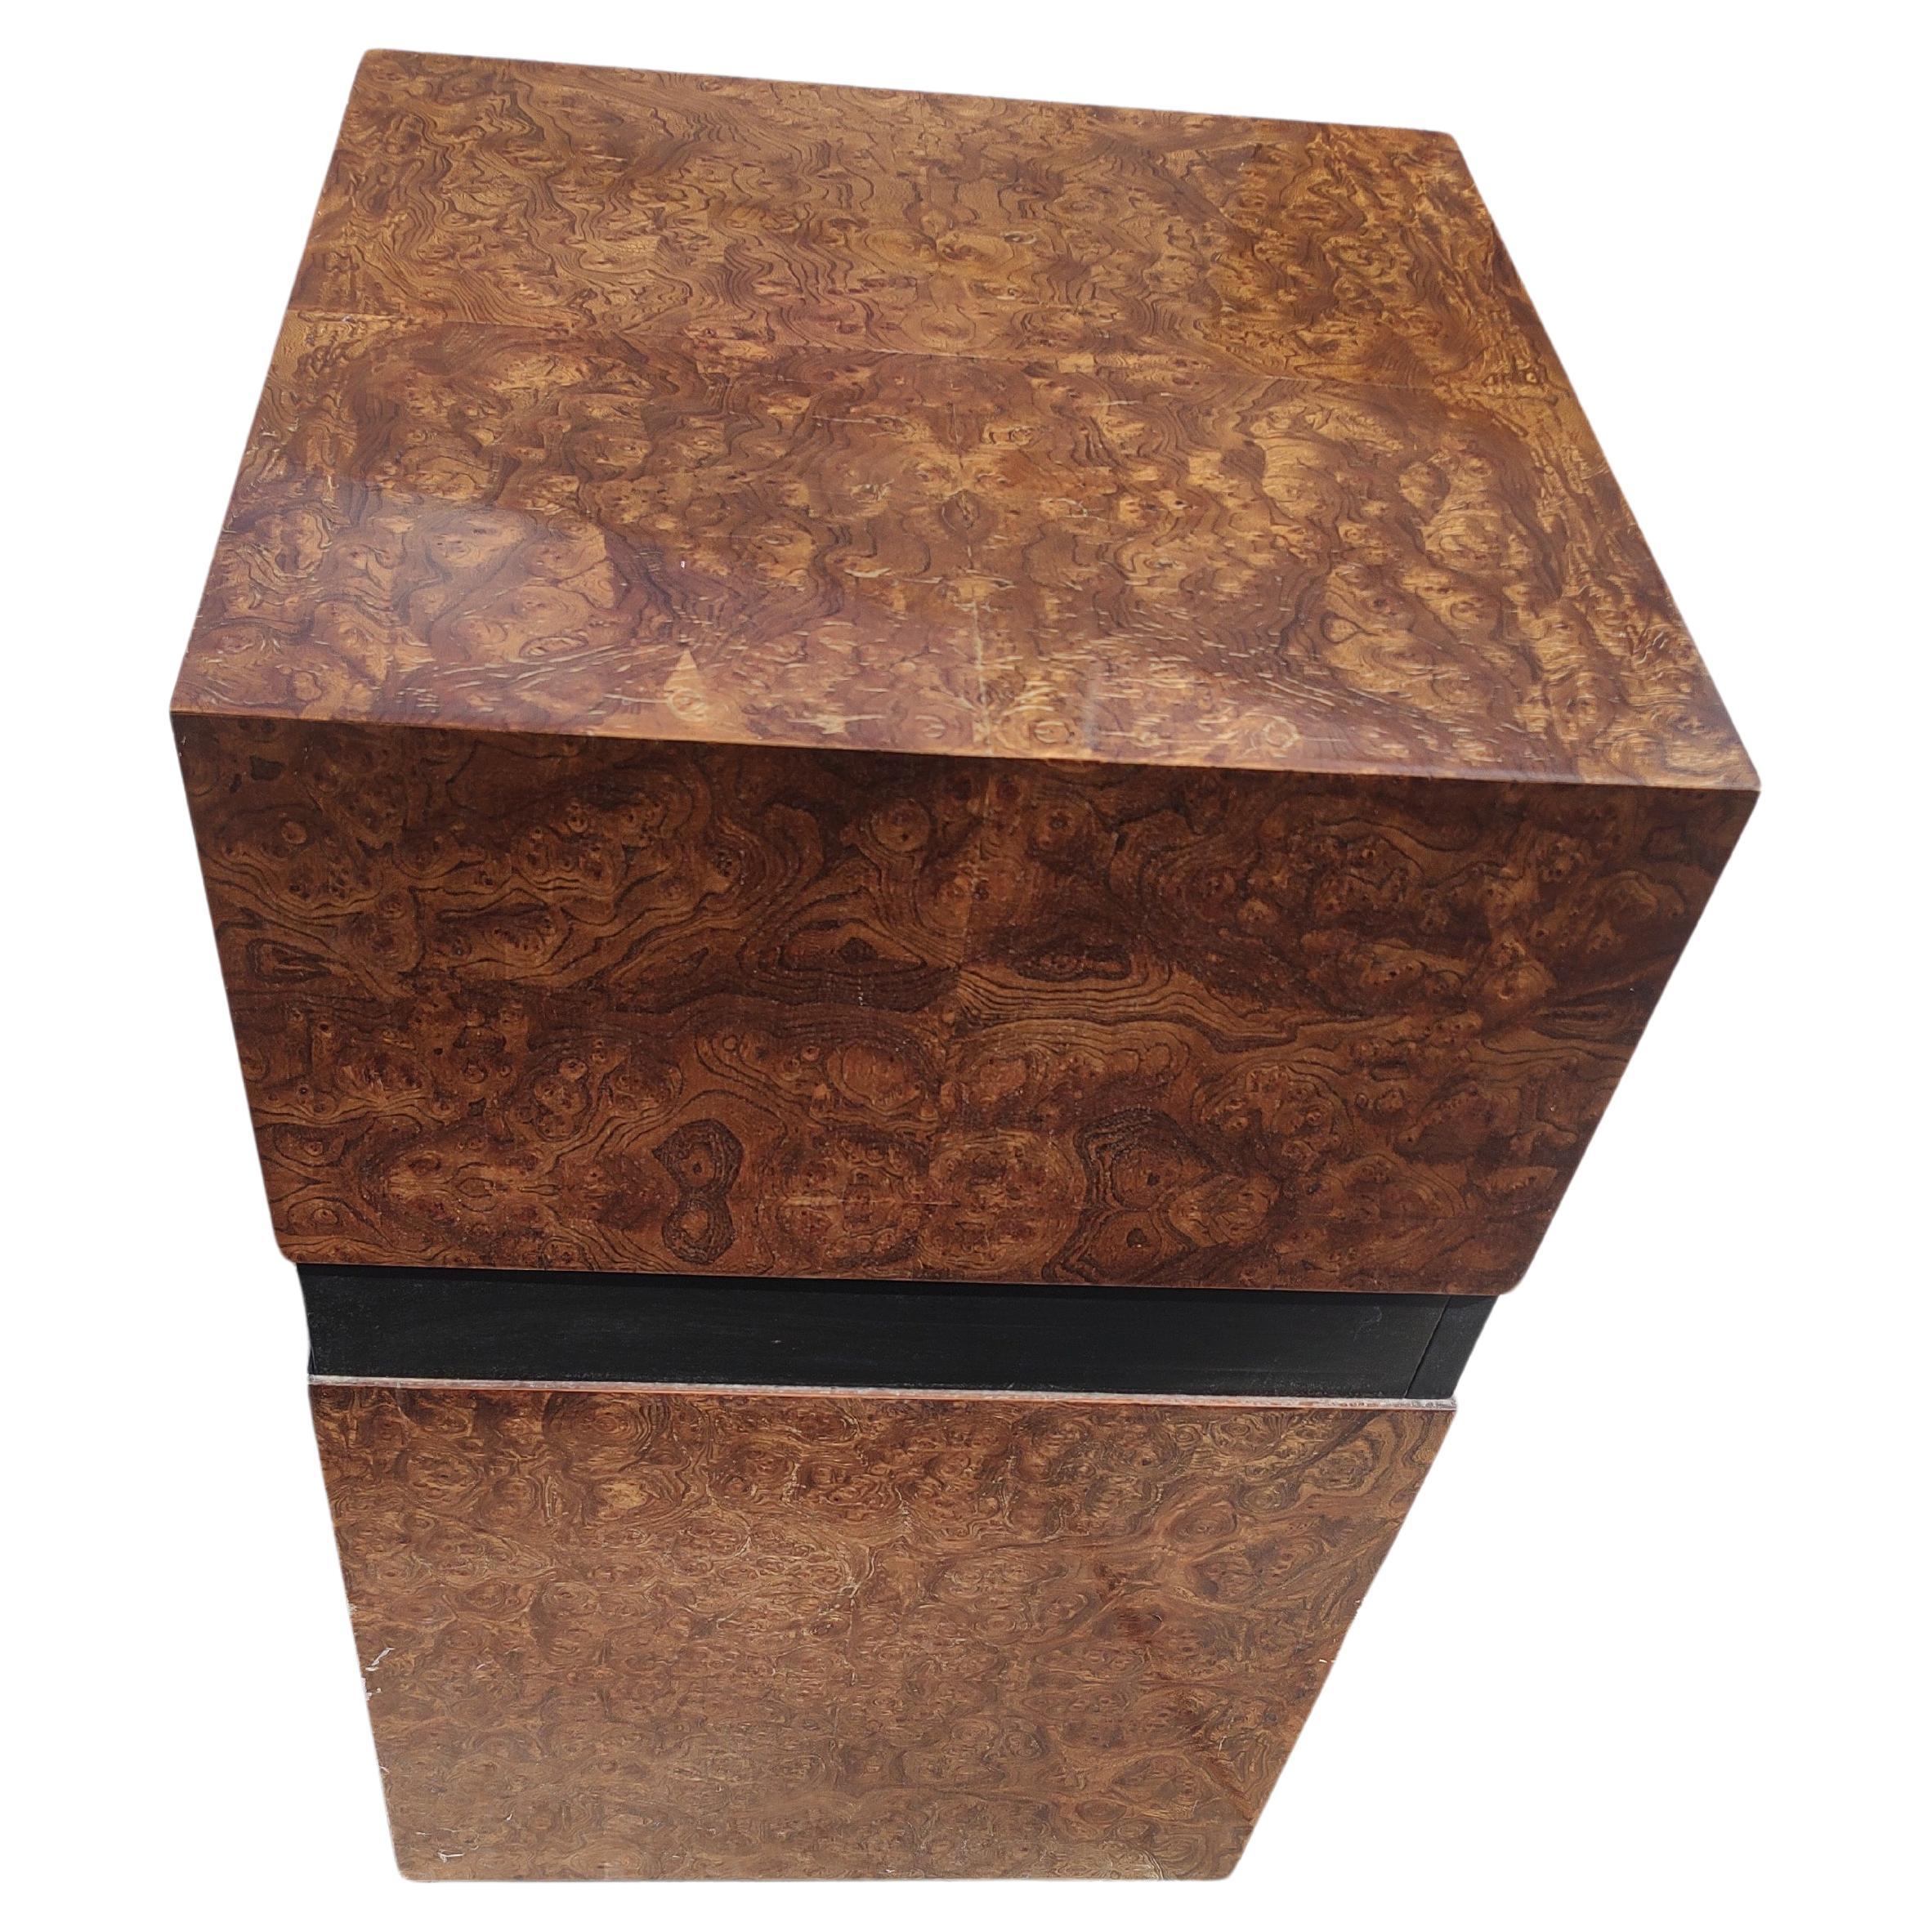 Hand-Crafted Mid Century Modern Burled Olivewood Cube Table Attributed to Milo Baughman 1975  For Sale